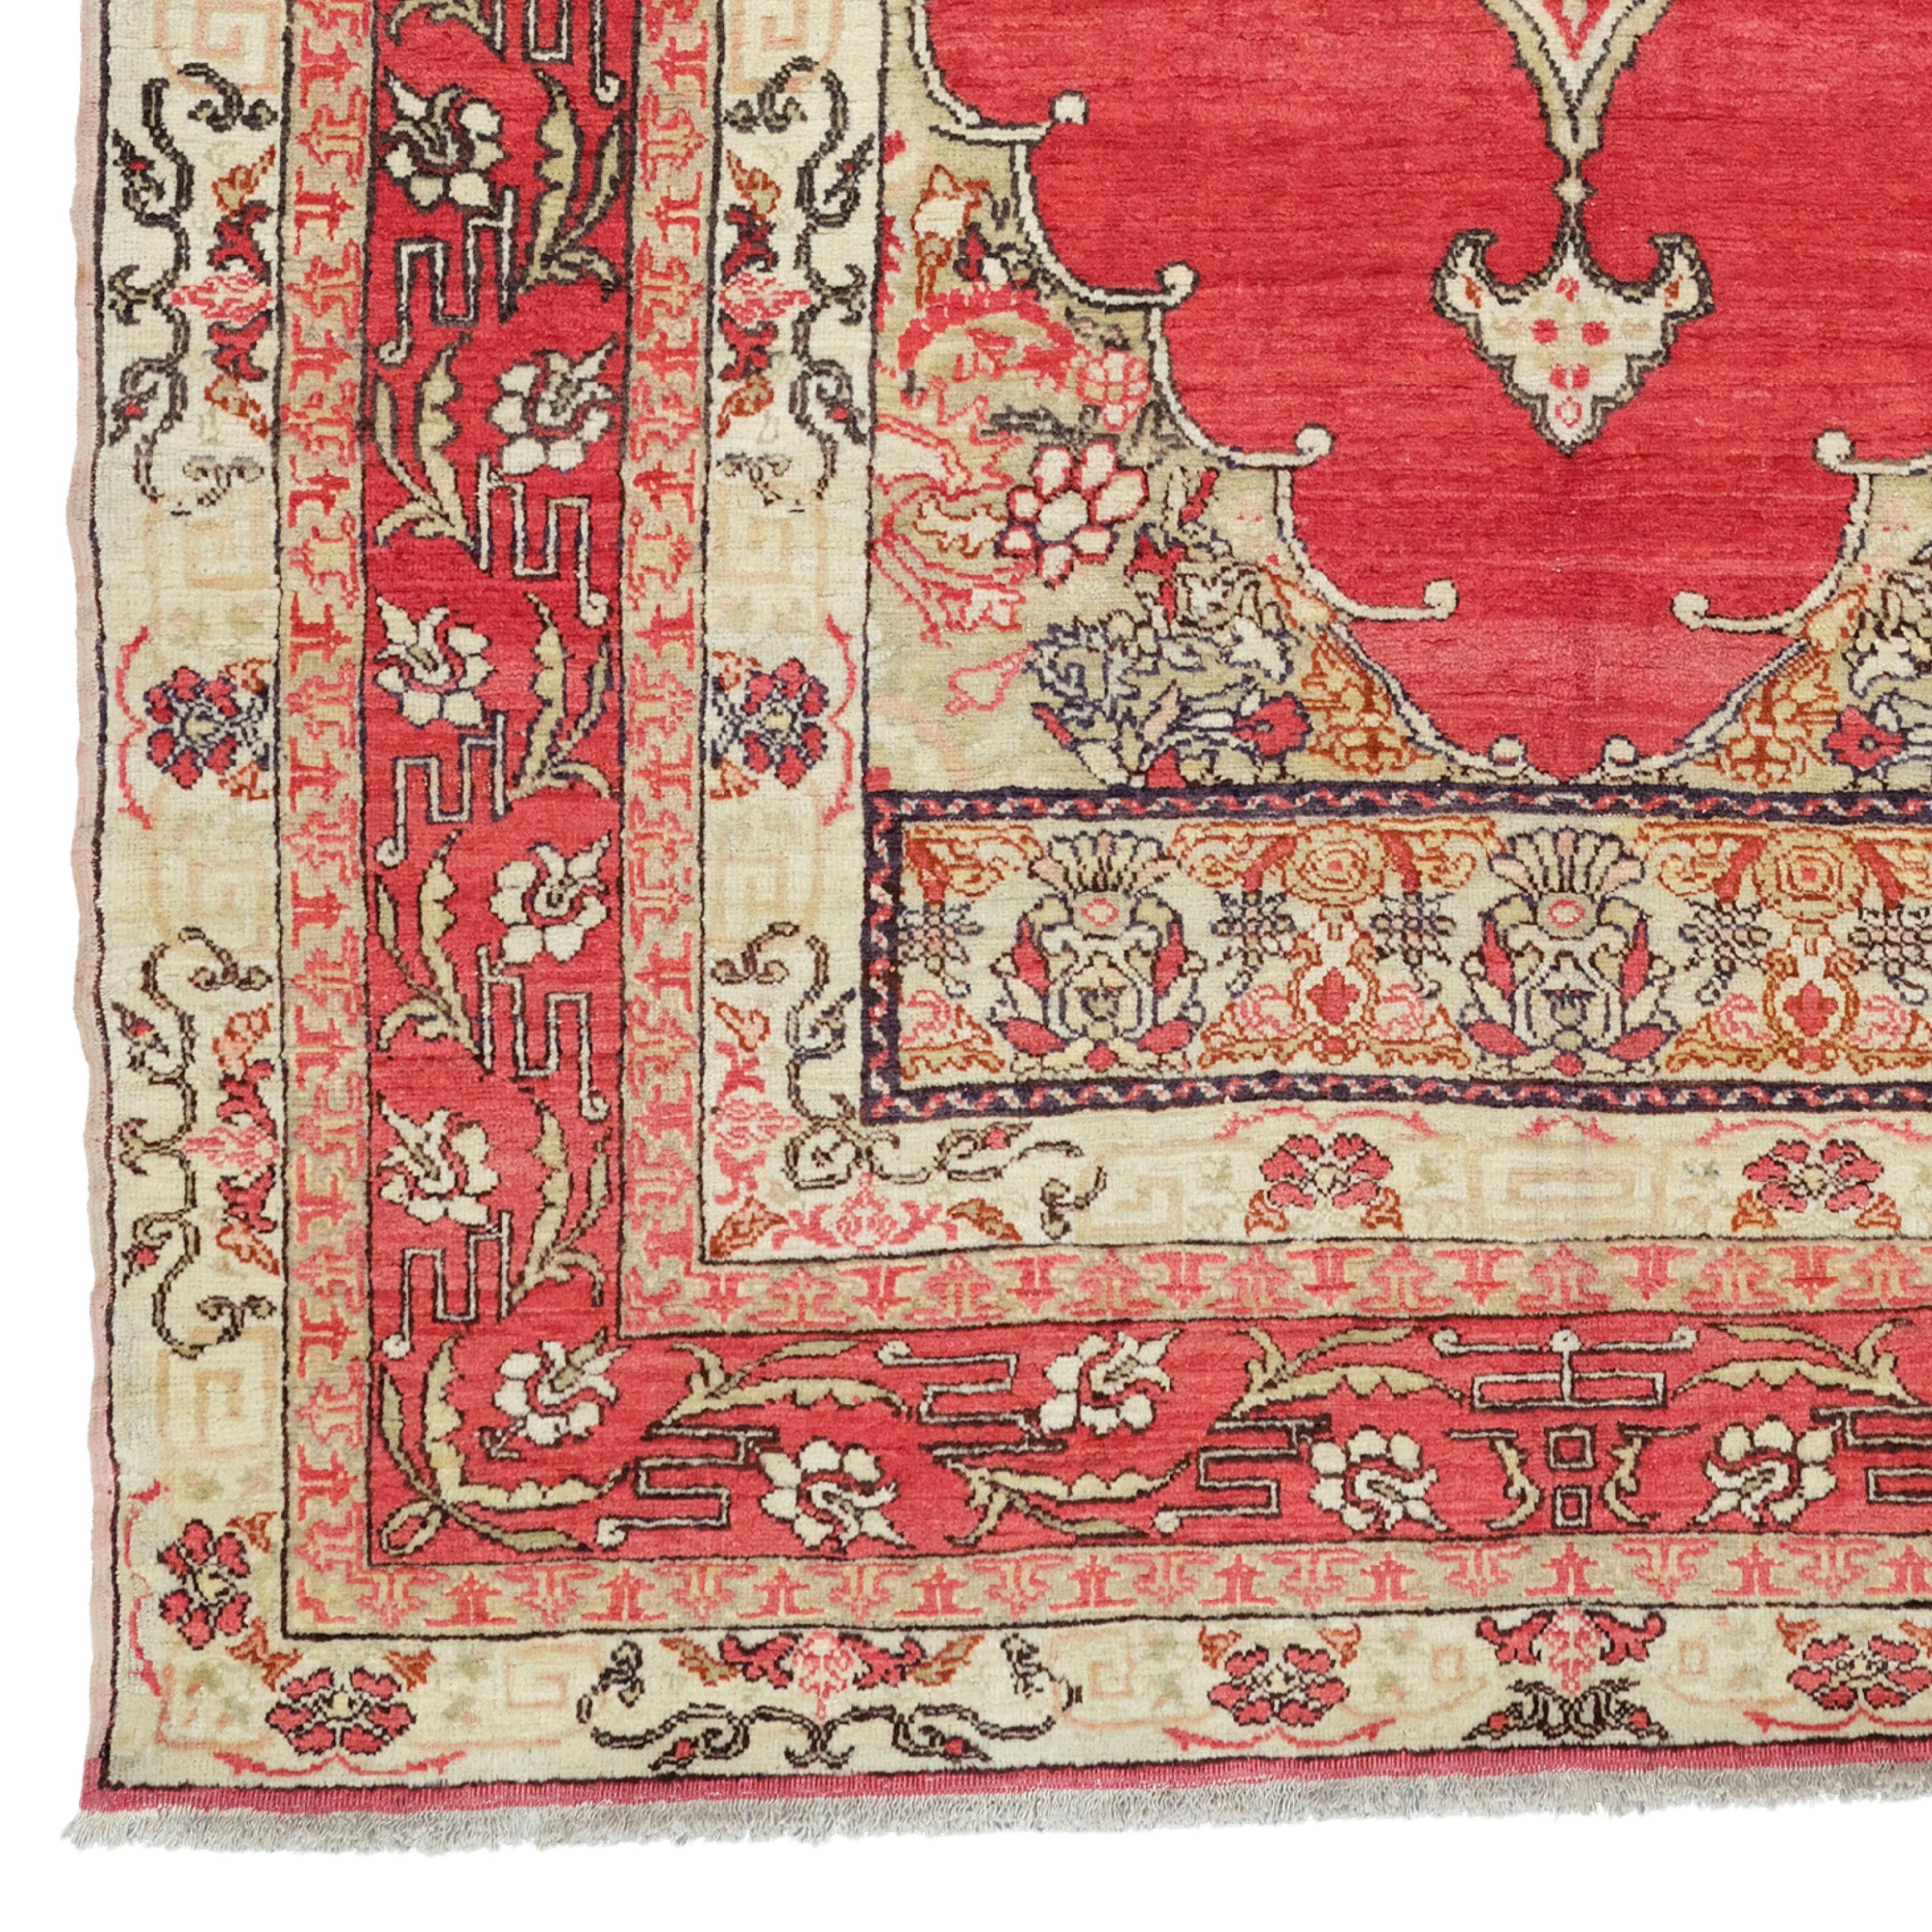 Antique Turkish Fertek Rug
19th Century Fertek Rug  Size: 130x212 cm

It is a type of carpet known as the Turkish Fertek carpet in the 19th century.

Colors and Patterns: This rug features a variety of floral and geometric patterns in red on a cream